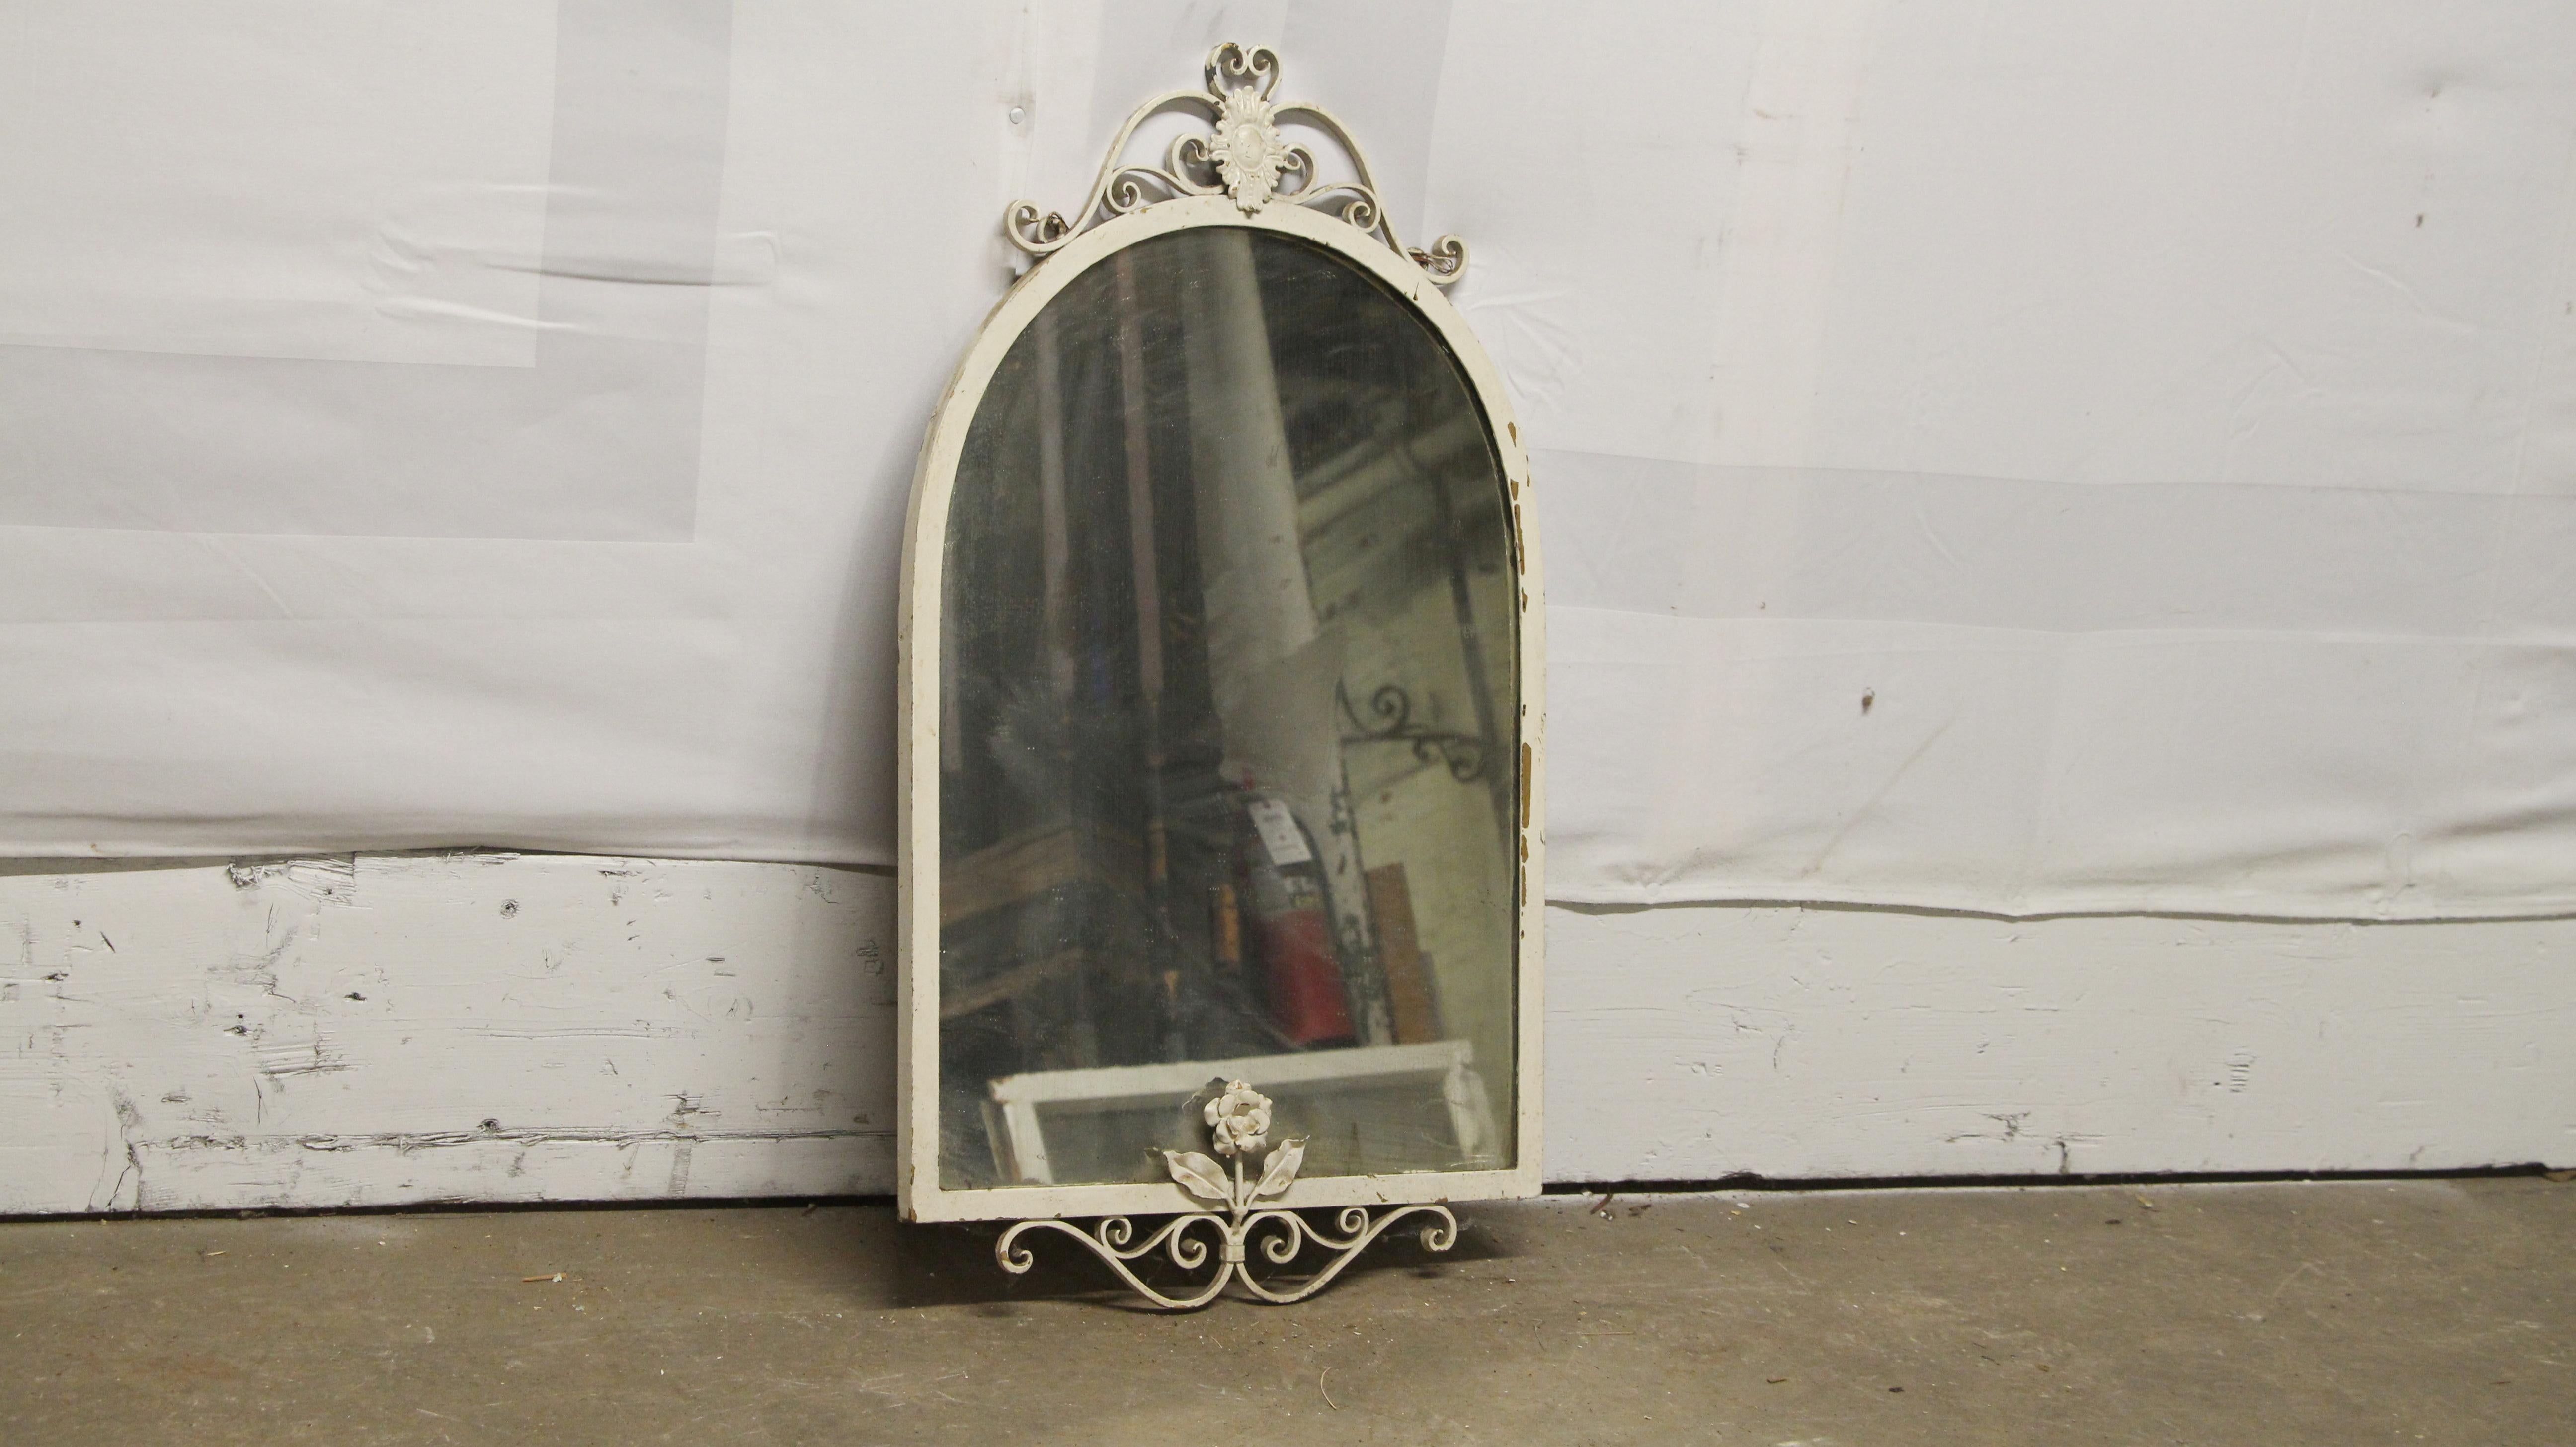 1940s shabby chic wrought iron vanity wall mirror with floral swirls detail and distressed white paint. This can be seen at our 302 Bowery location in NoHo in Manhattan.